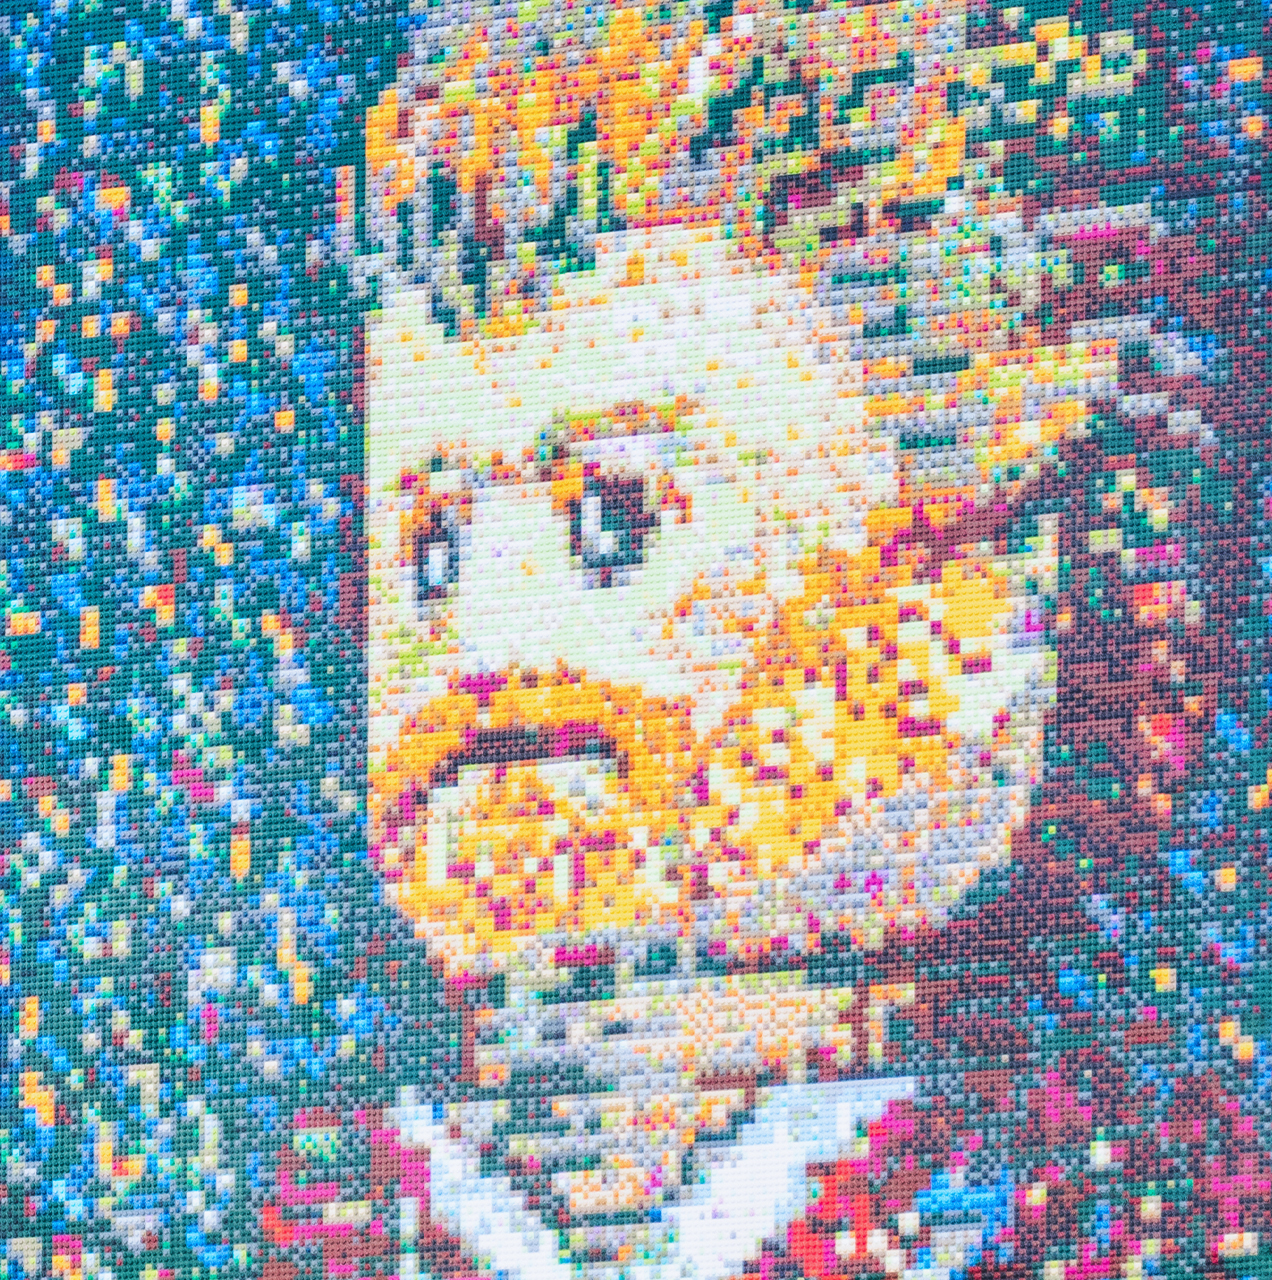 Earning attention with LEGO art